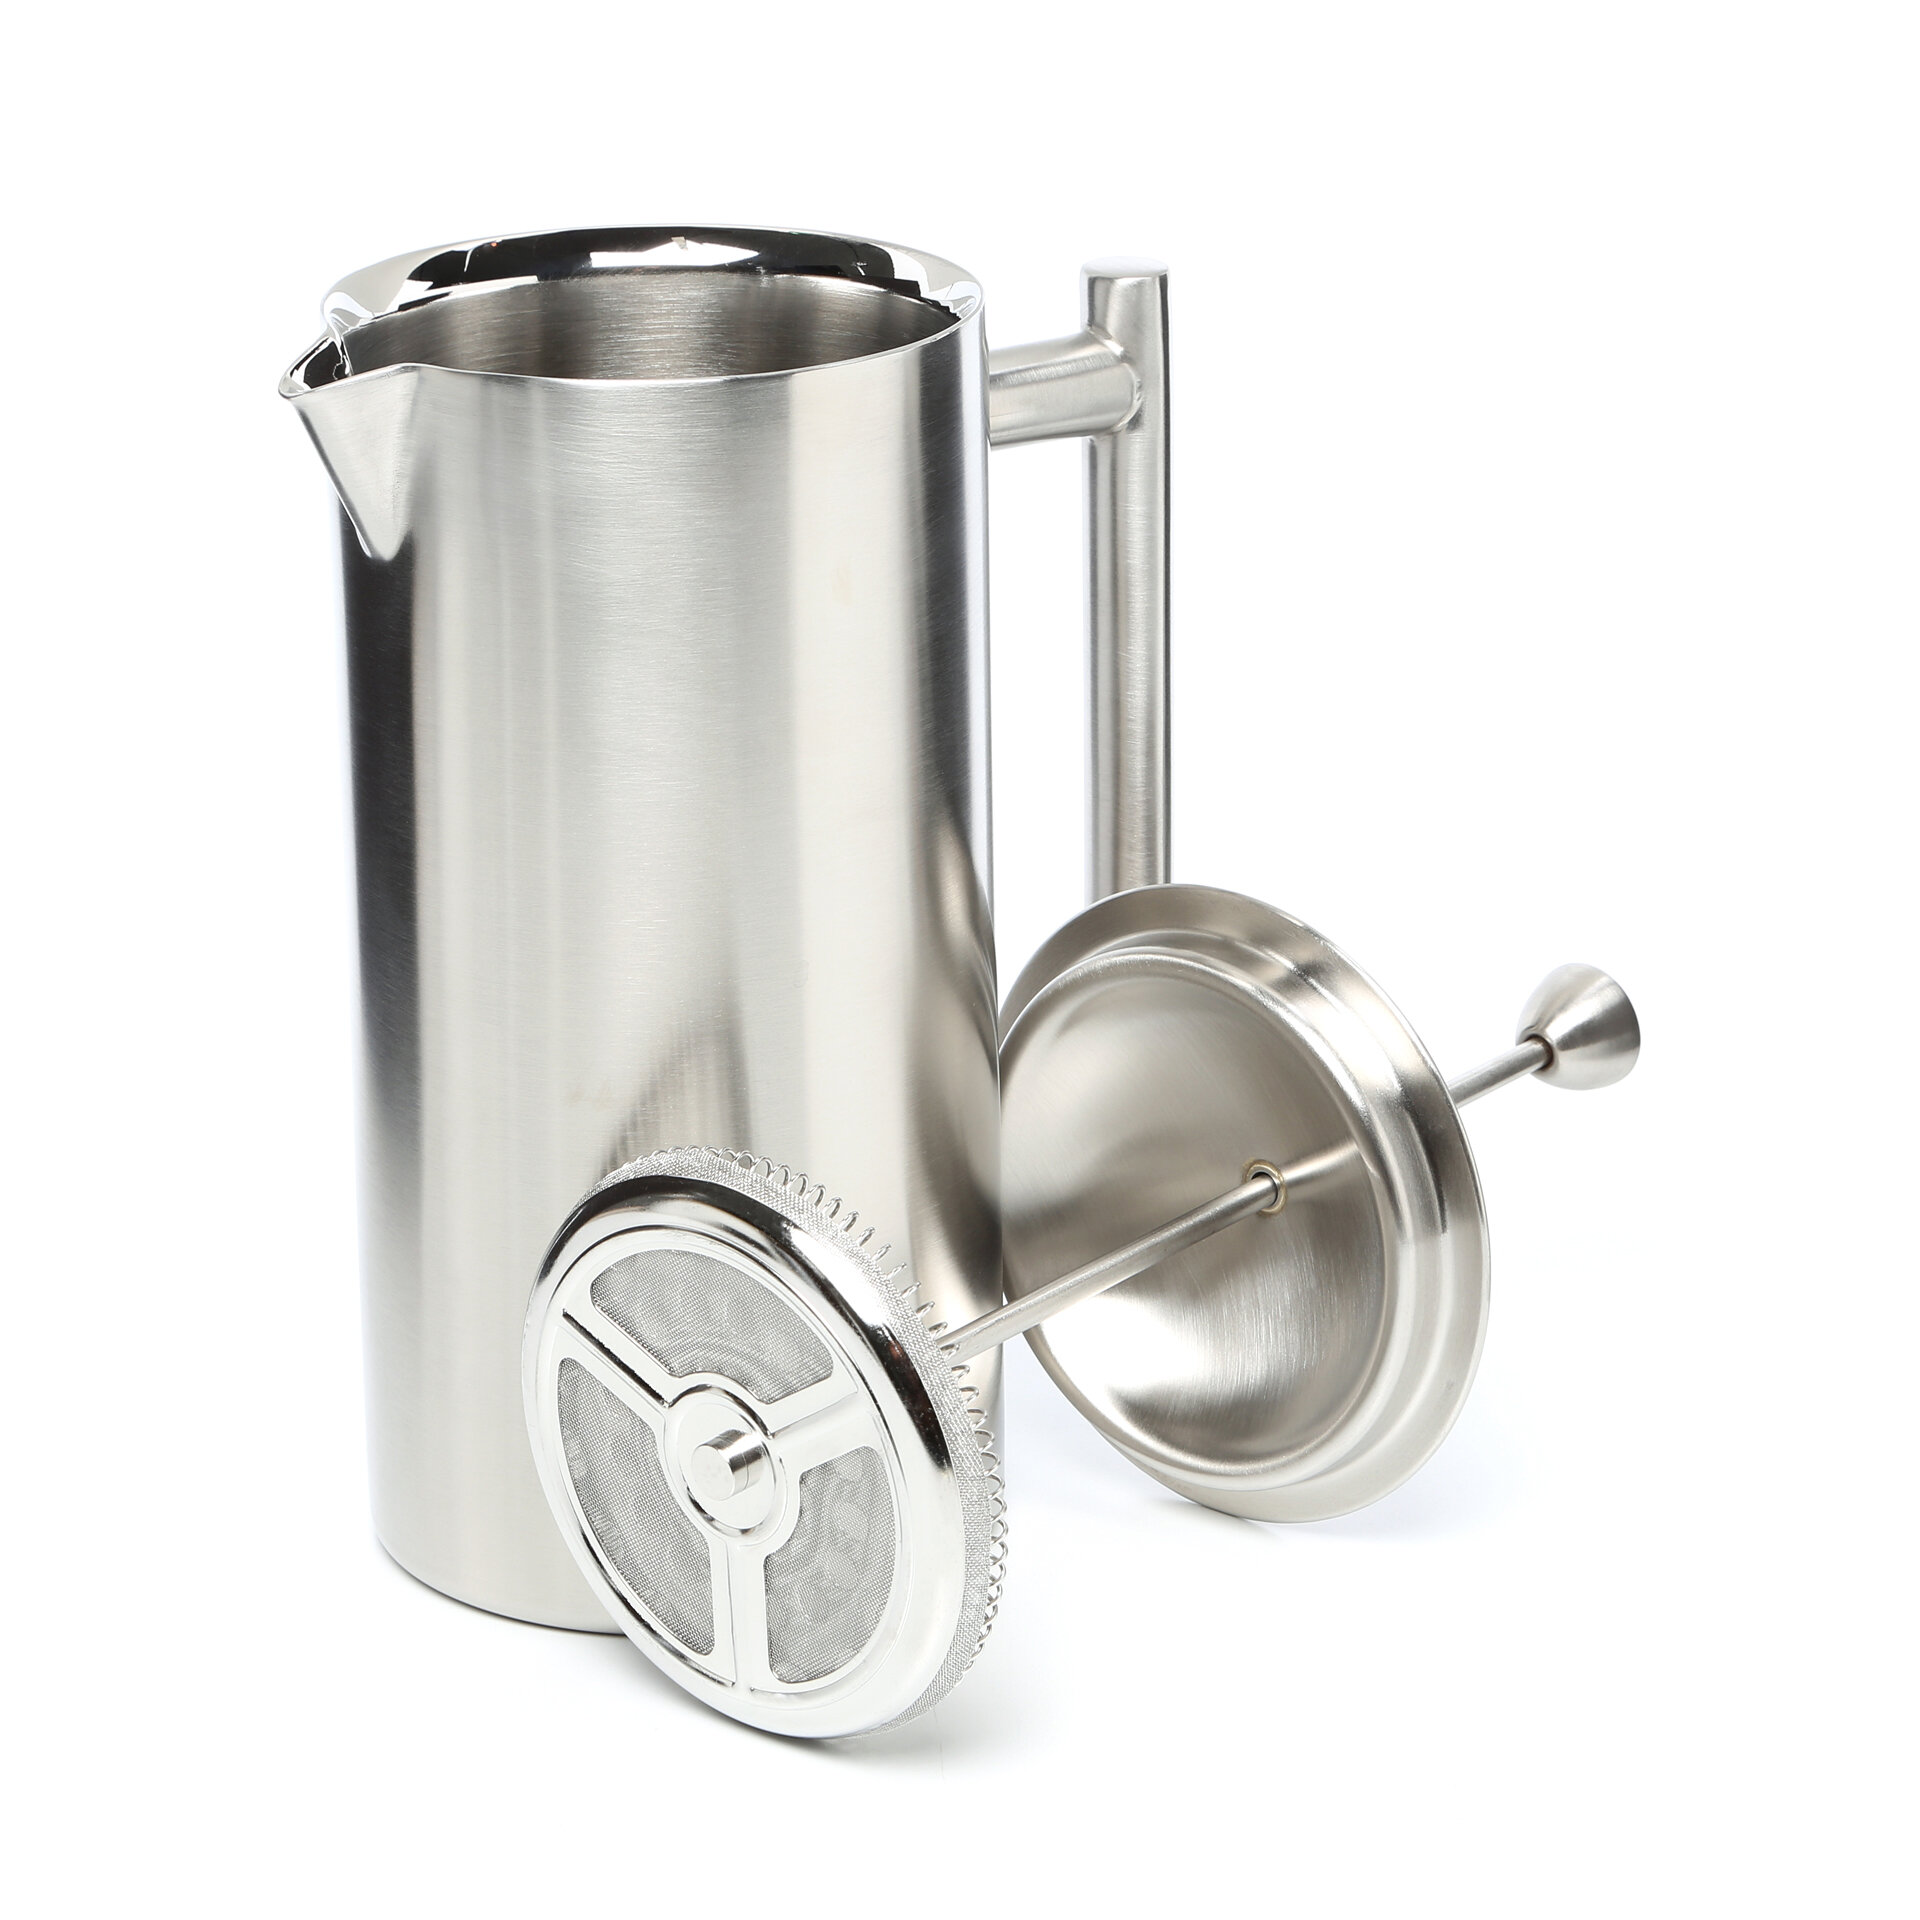 Frieling French Press - Double Wall, Stainless Steel with with Dual Screen